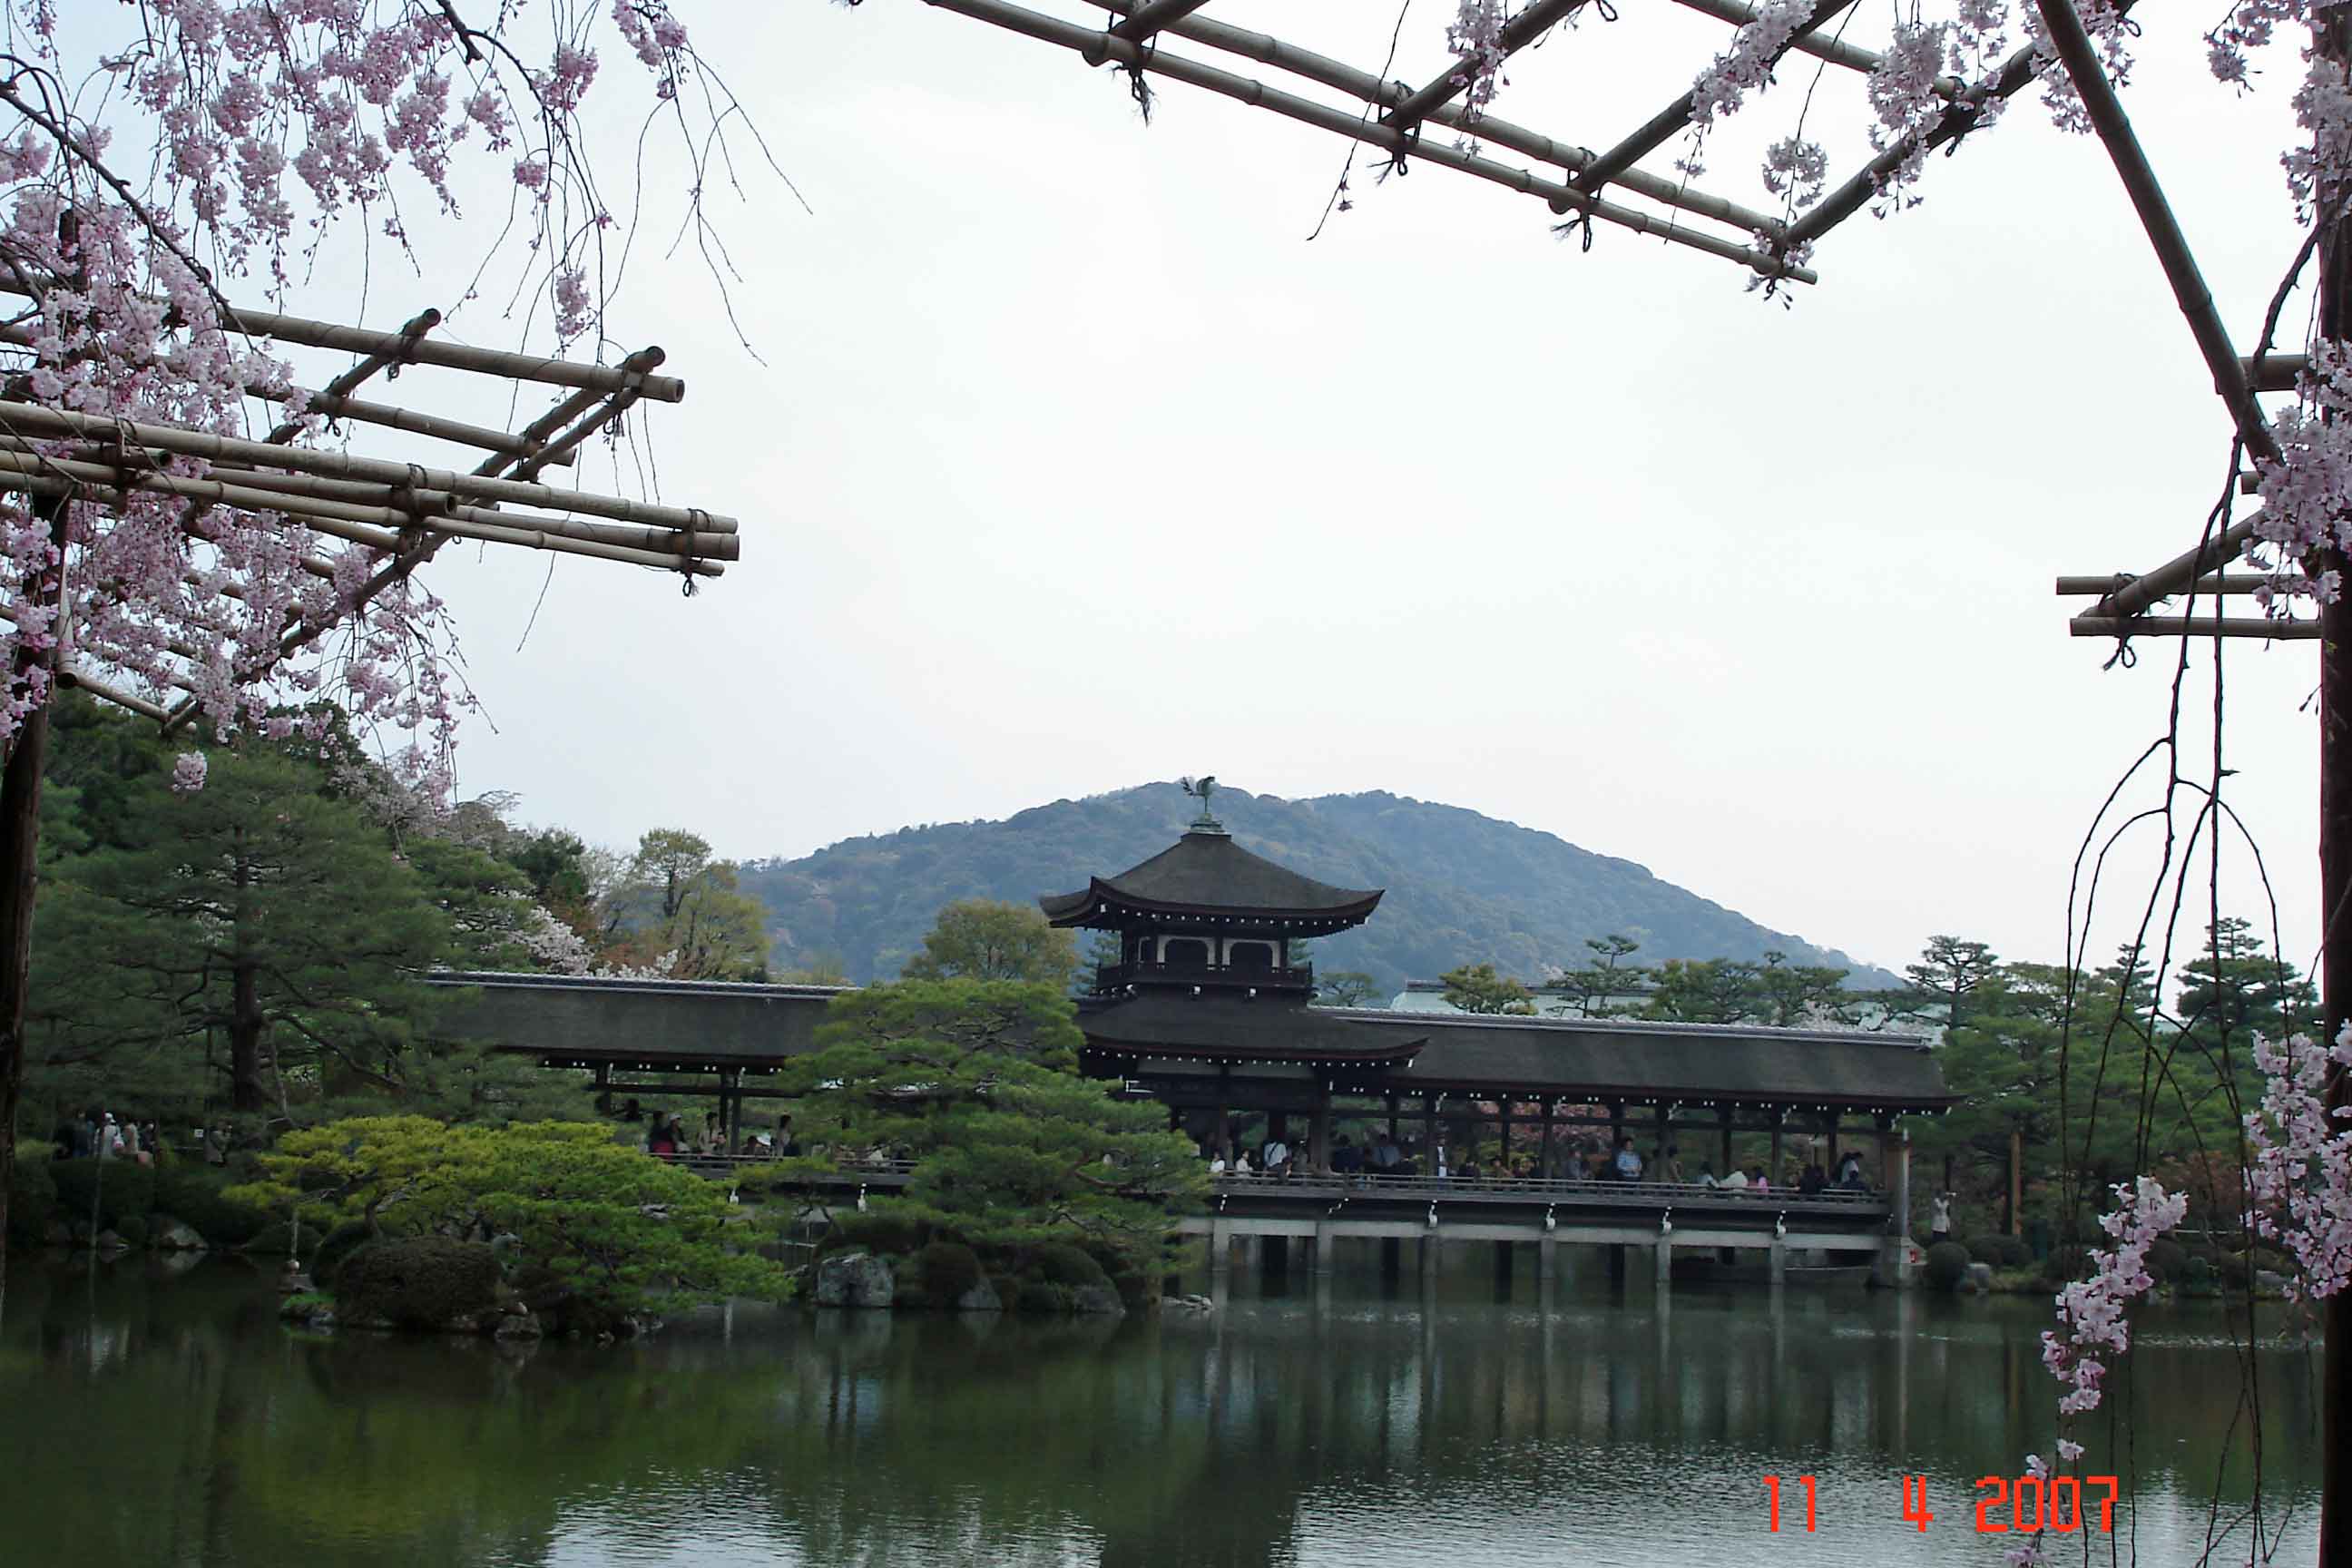 Pavilion-with-mountain